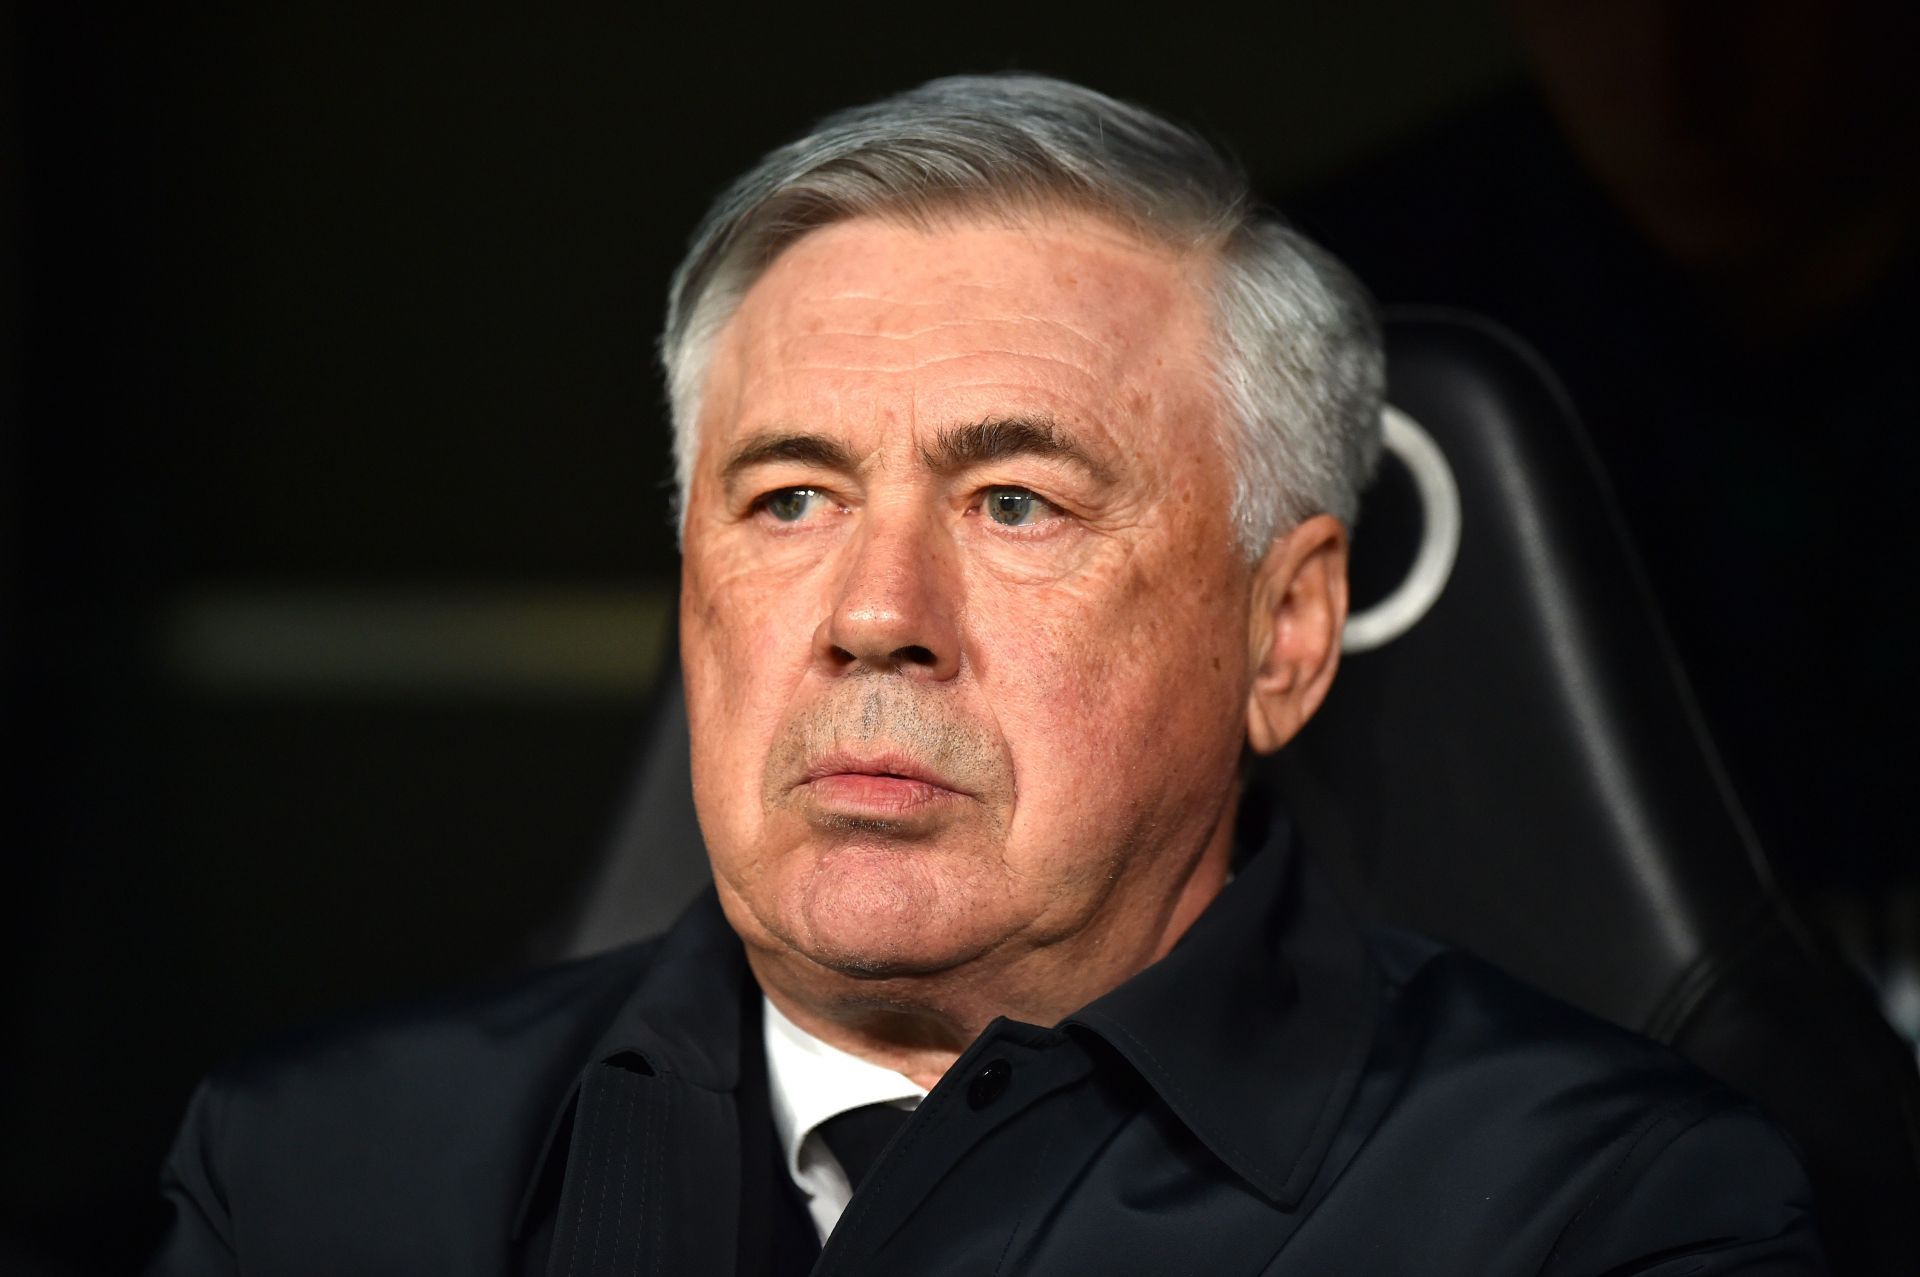 Carlo Ancelotti has already given the curve that all football managers go through in his book